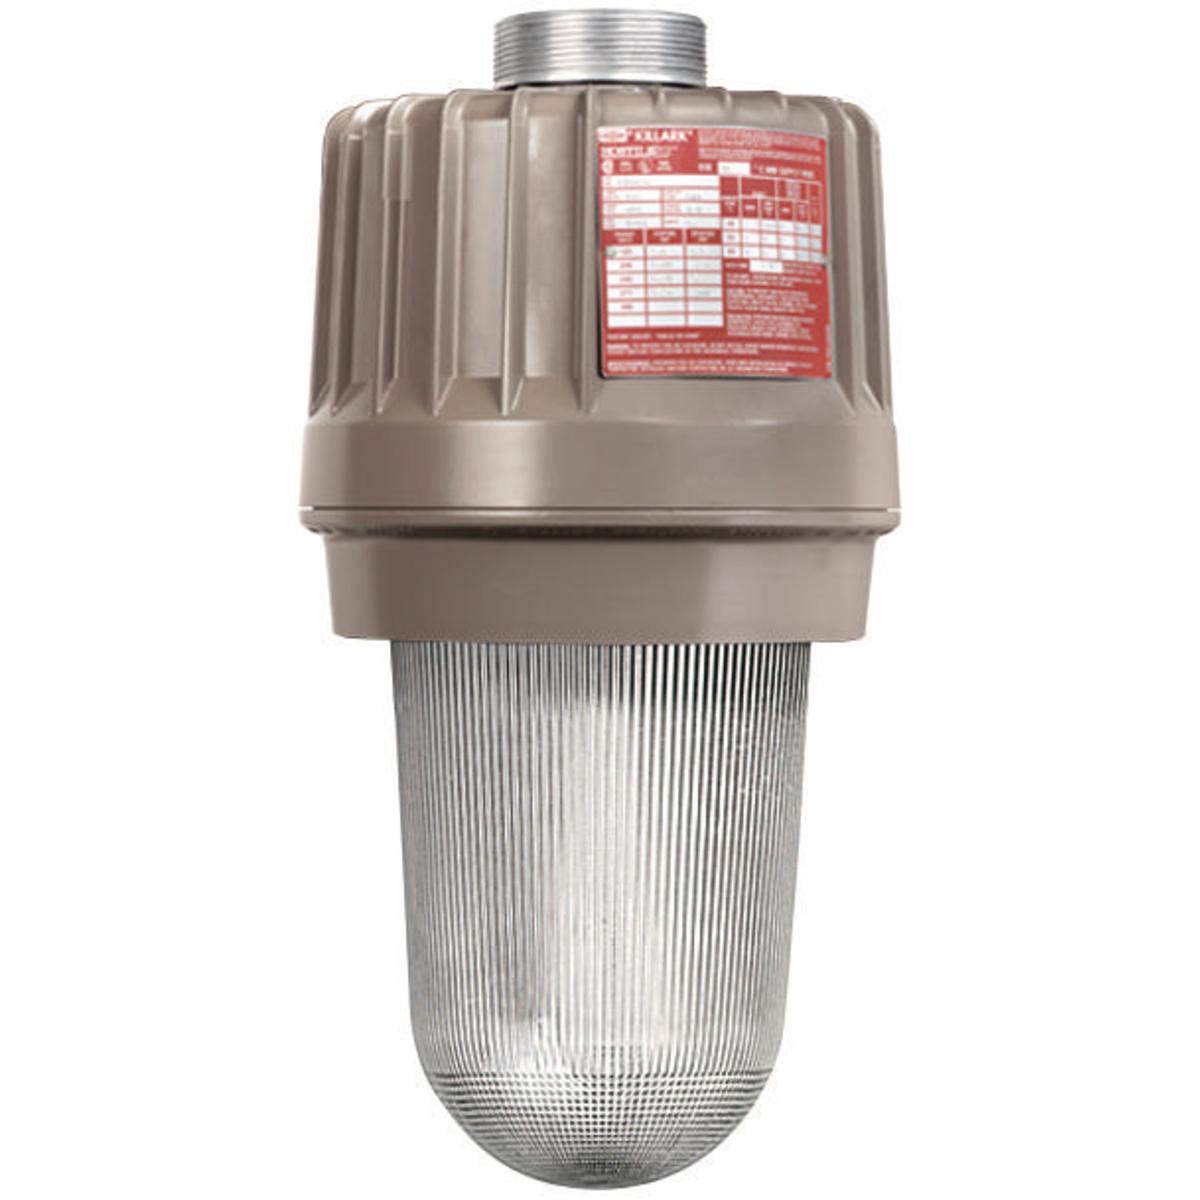 Hubbell EZS250 EZ Series - HPS Housing Globe & Globe Support Assemblies - 250Watts - 120/208/240/277 Volts  ; Three light sources – High Pressure Sodium (50-400W), Metal Halide (70-400W) and Pulse Start Metal Halide (175-400W) ; Mounting choice –Pendant, ceiling, 25˚ st